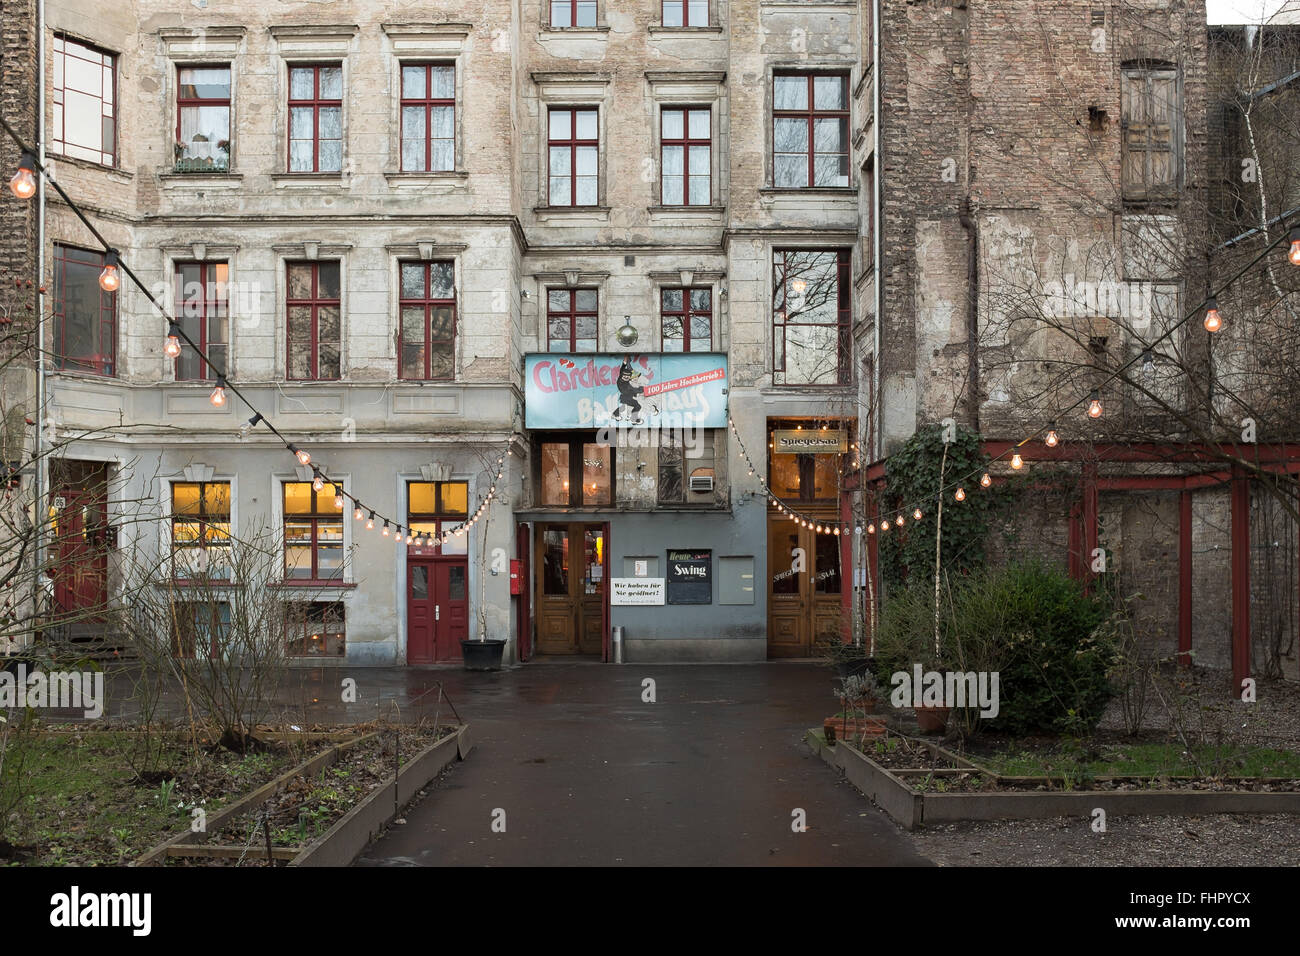 BERLIN, FEBRUARY 24: The Clarchens Ballhaus, Auguststrasse Berlin Mitte on January 28, 2016. Stock Photo